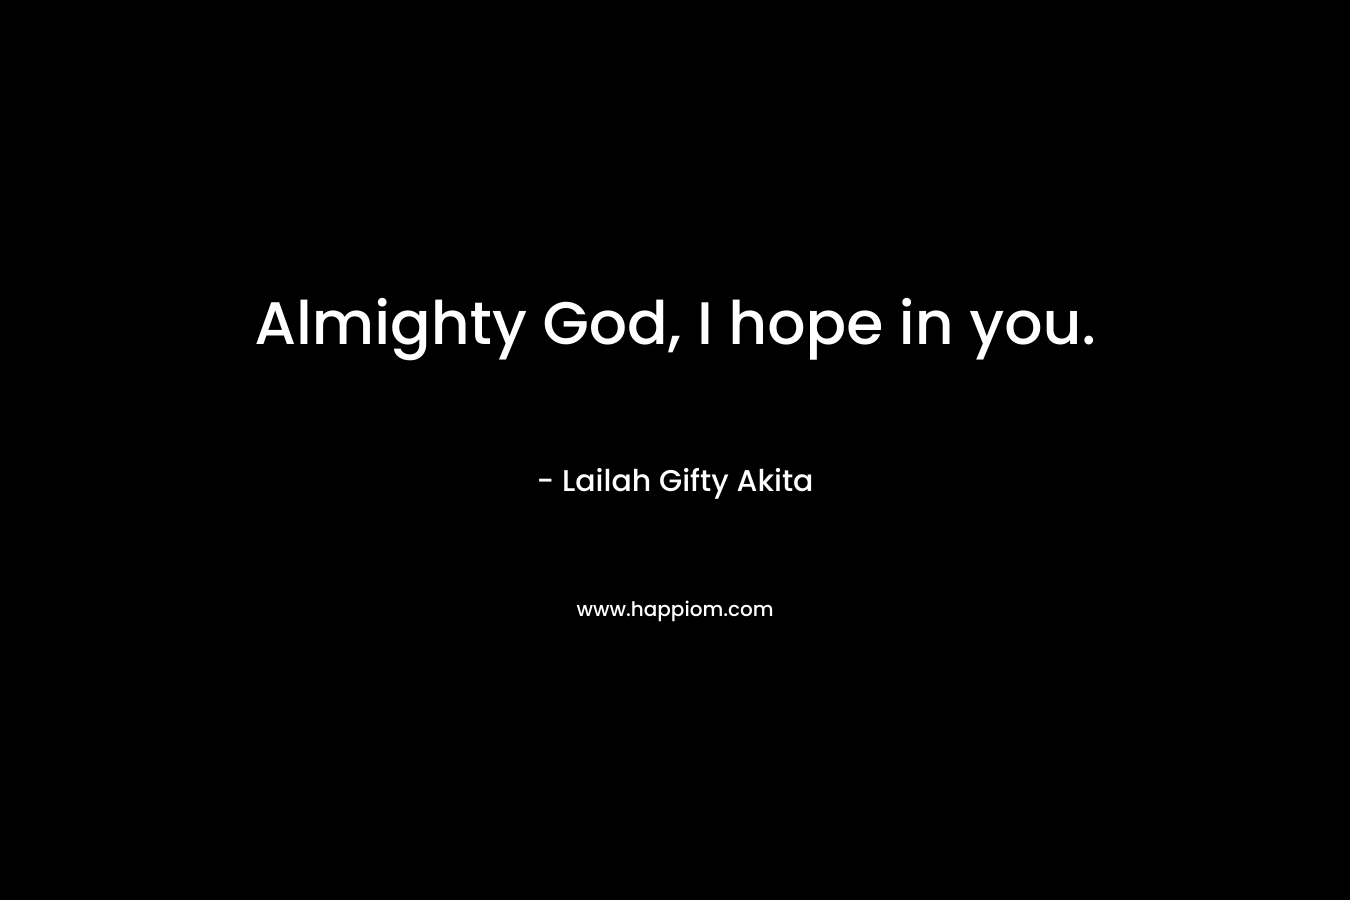 Almighty God, I hope in you.